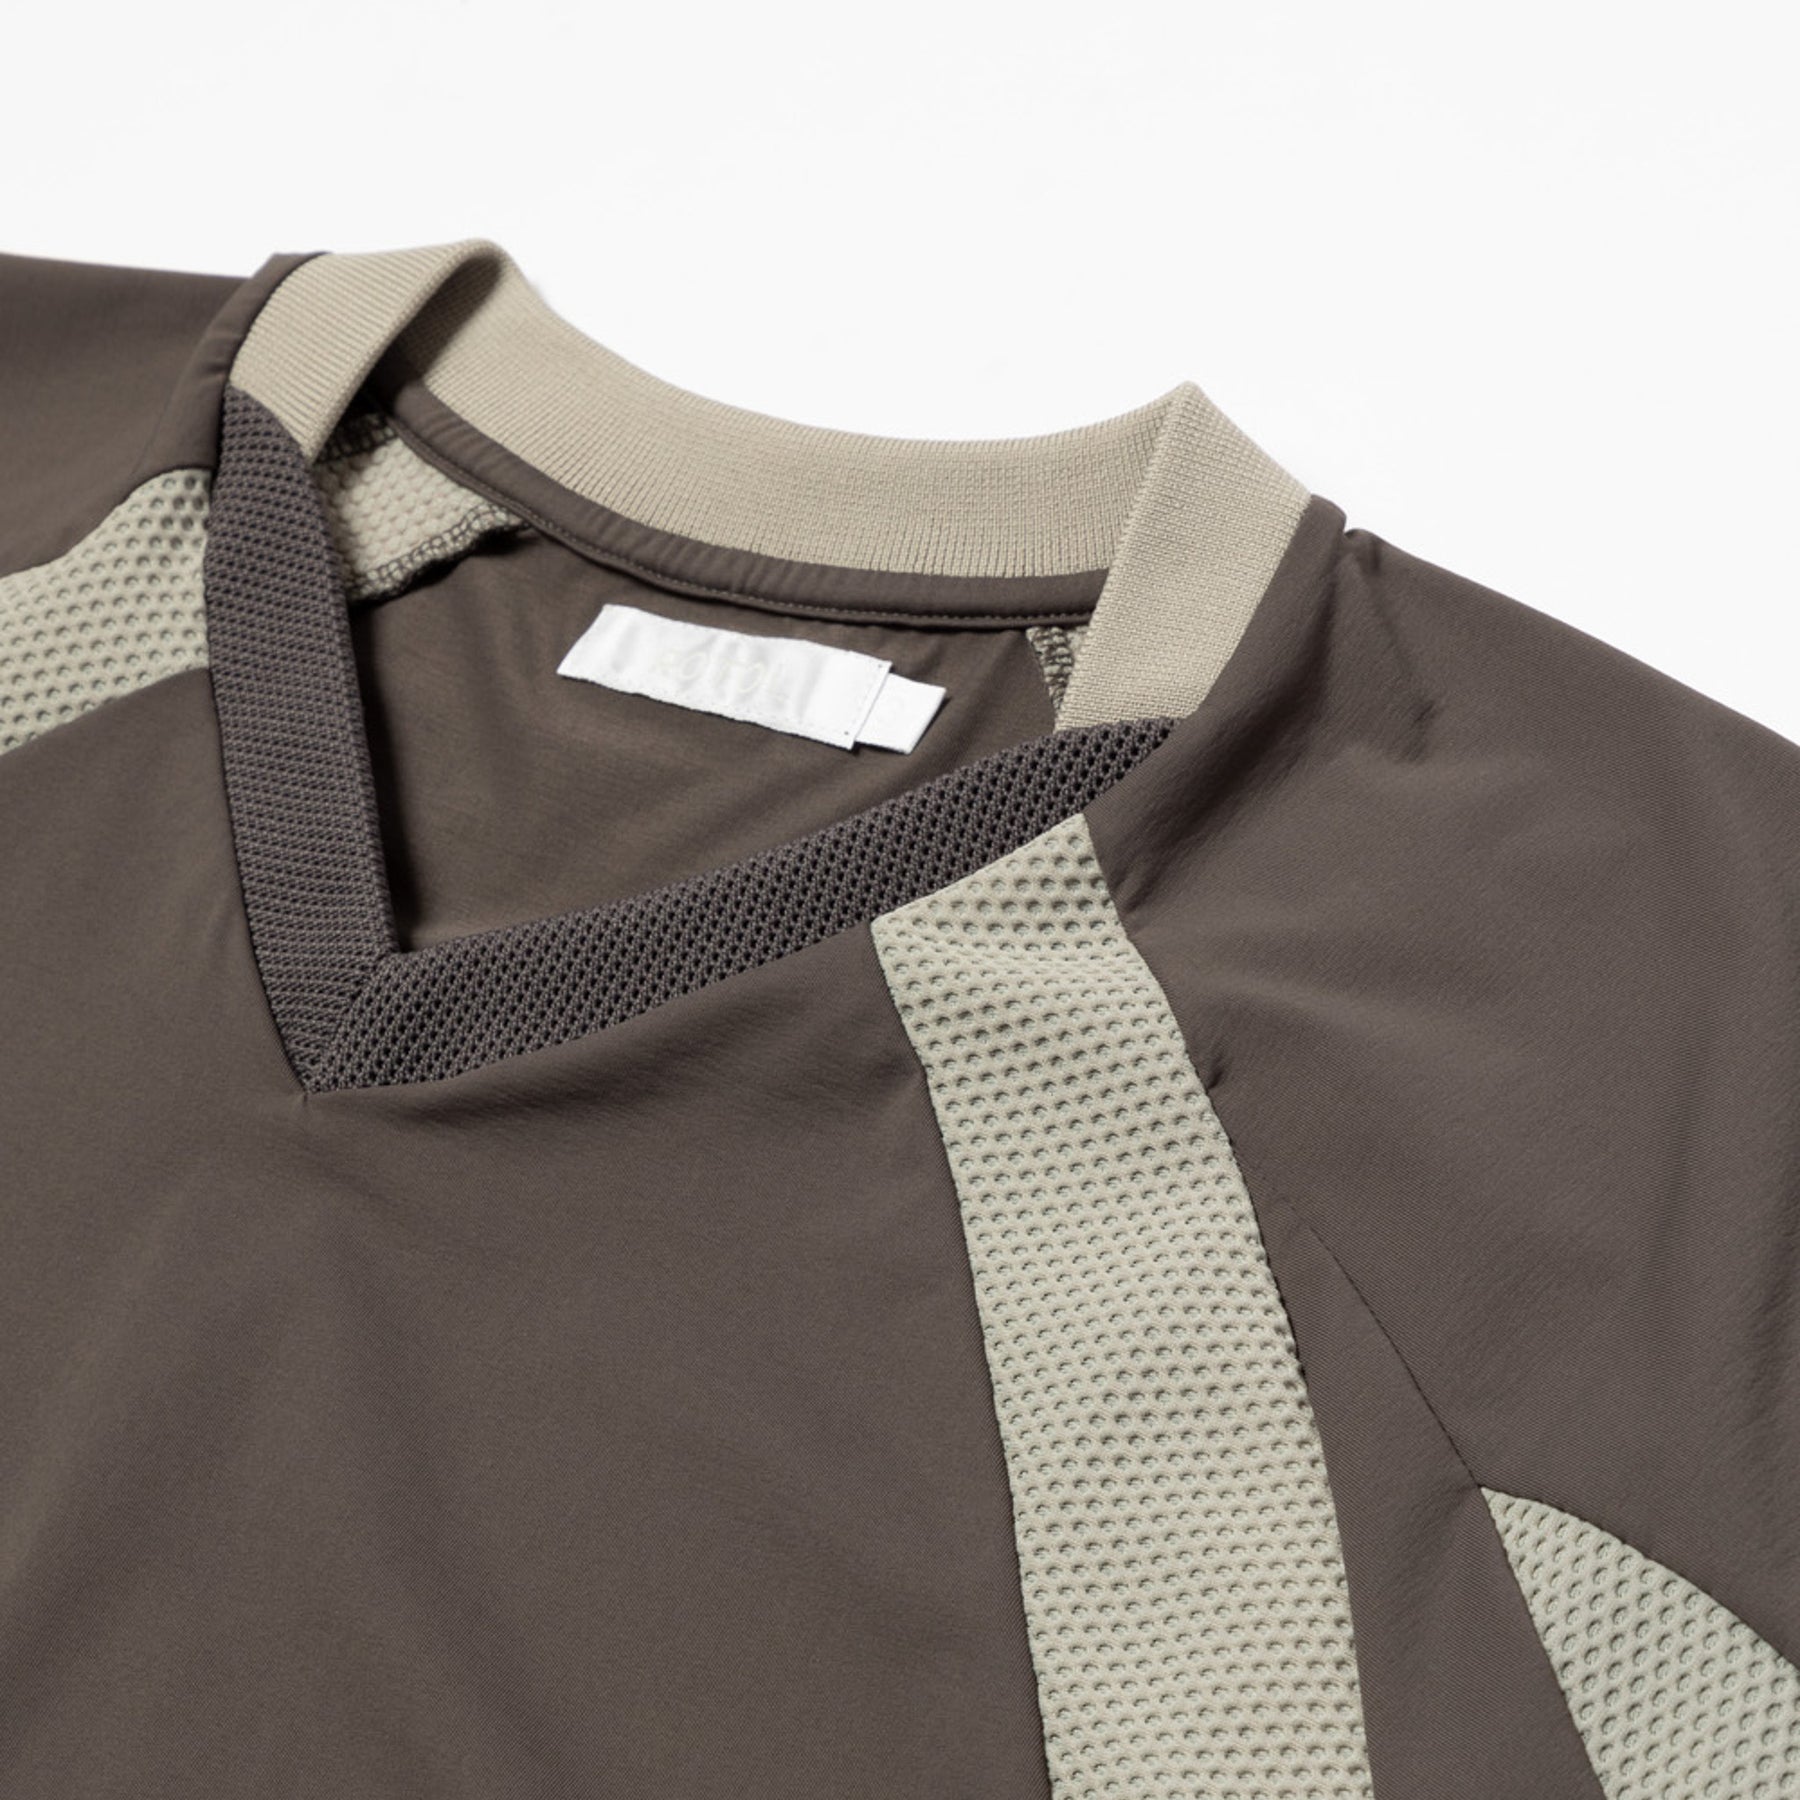 <span style="color: #f50b0b;">Last One</span> ROTOL / SHORT SLEEVE GAME SHIRT BROWN